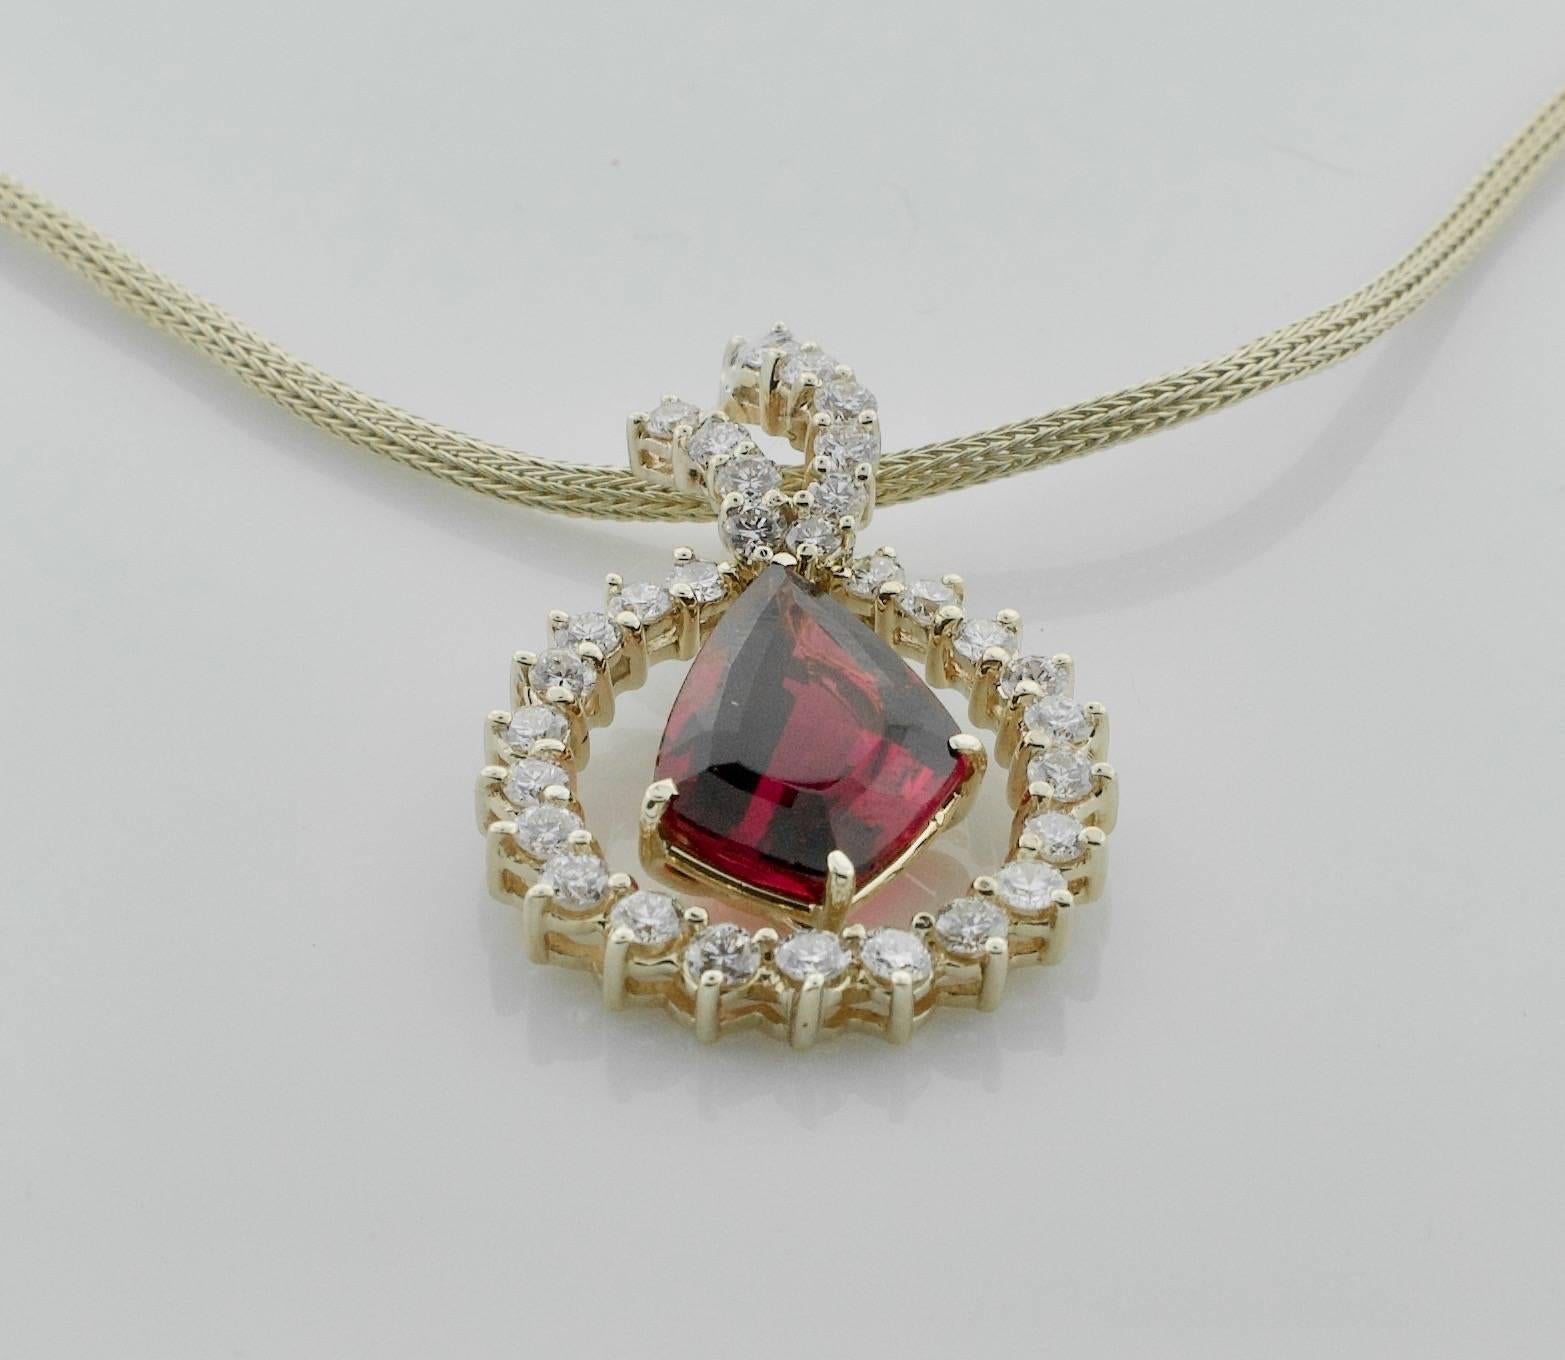 18k Yellow Gold Fancy Shaped Tourmaline and Diamond Freeform Necklace 
One Fancy Cut  Tourmaline weighing 7.50 carats approximately [bright with no imperfections visible to the naked eye]
A One of a Kind Shape
Thirty One Round Brilliant Cut Diamonds